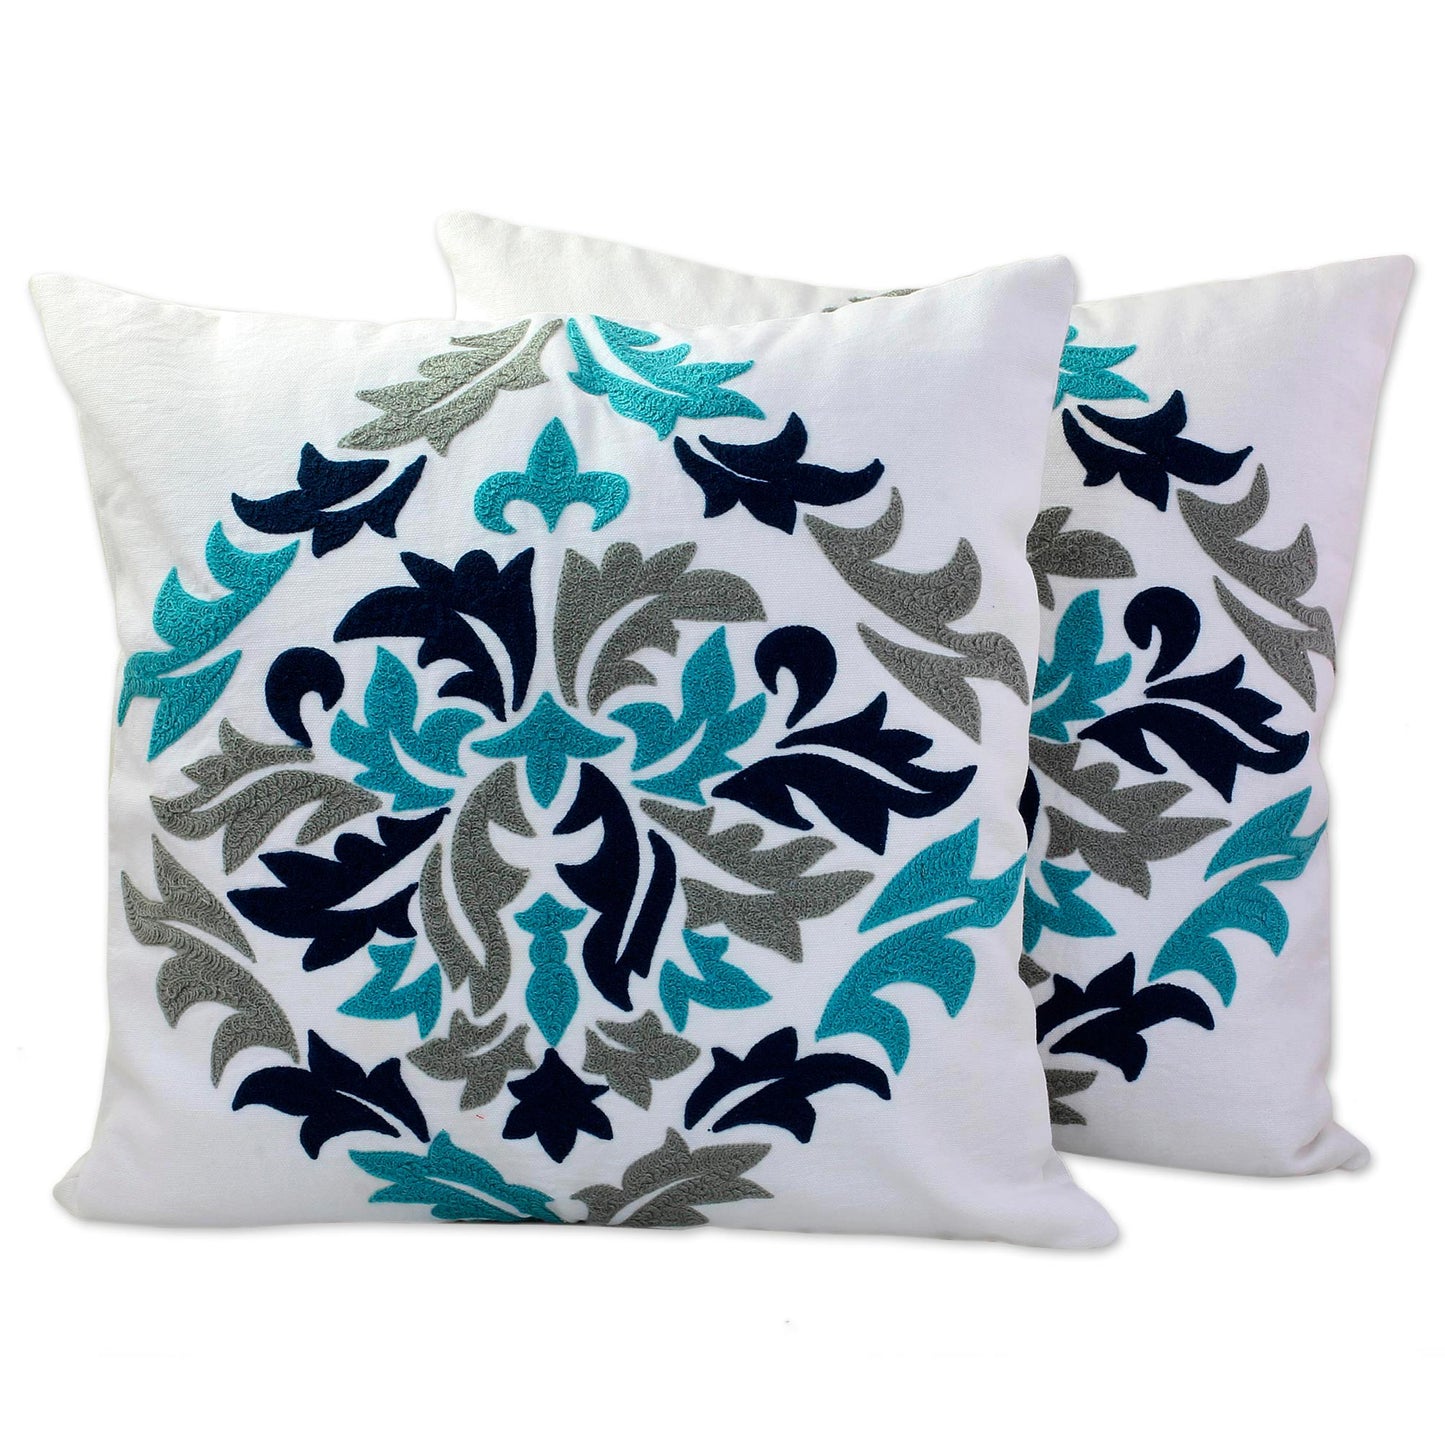 Fresh Leaves Embroidered Cotton Cushion Covers Made in India (Pair)